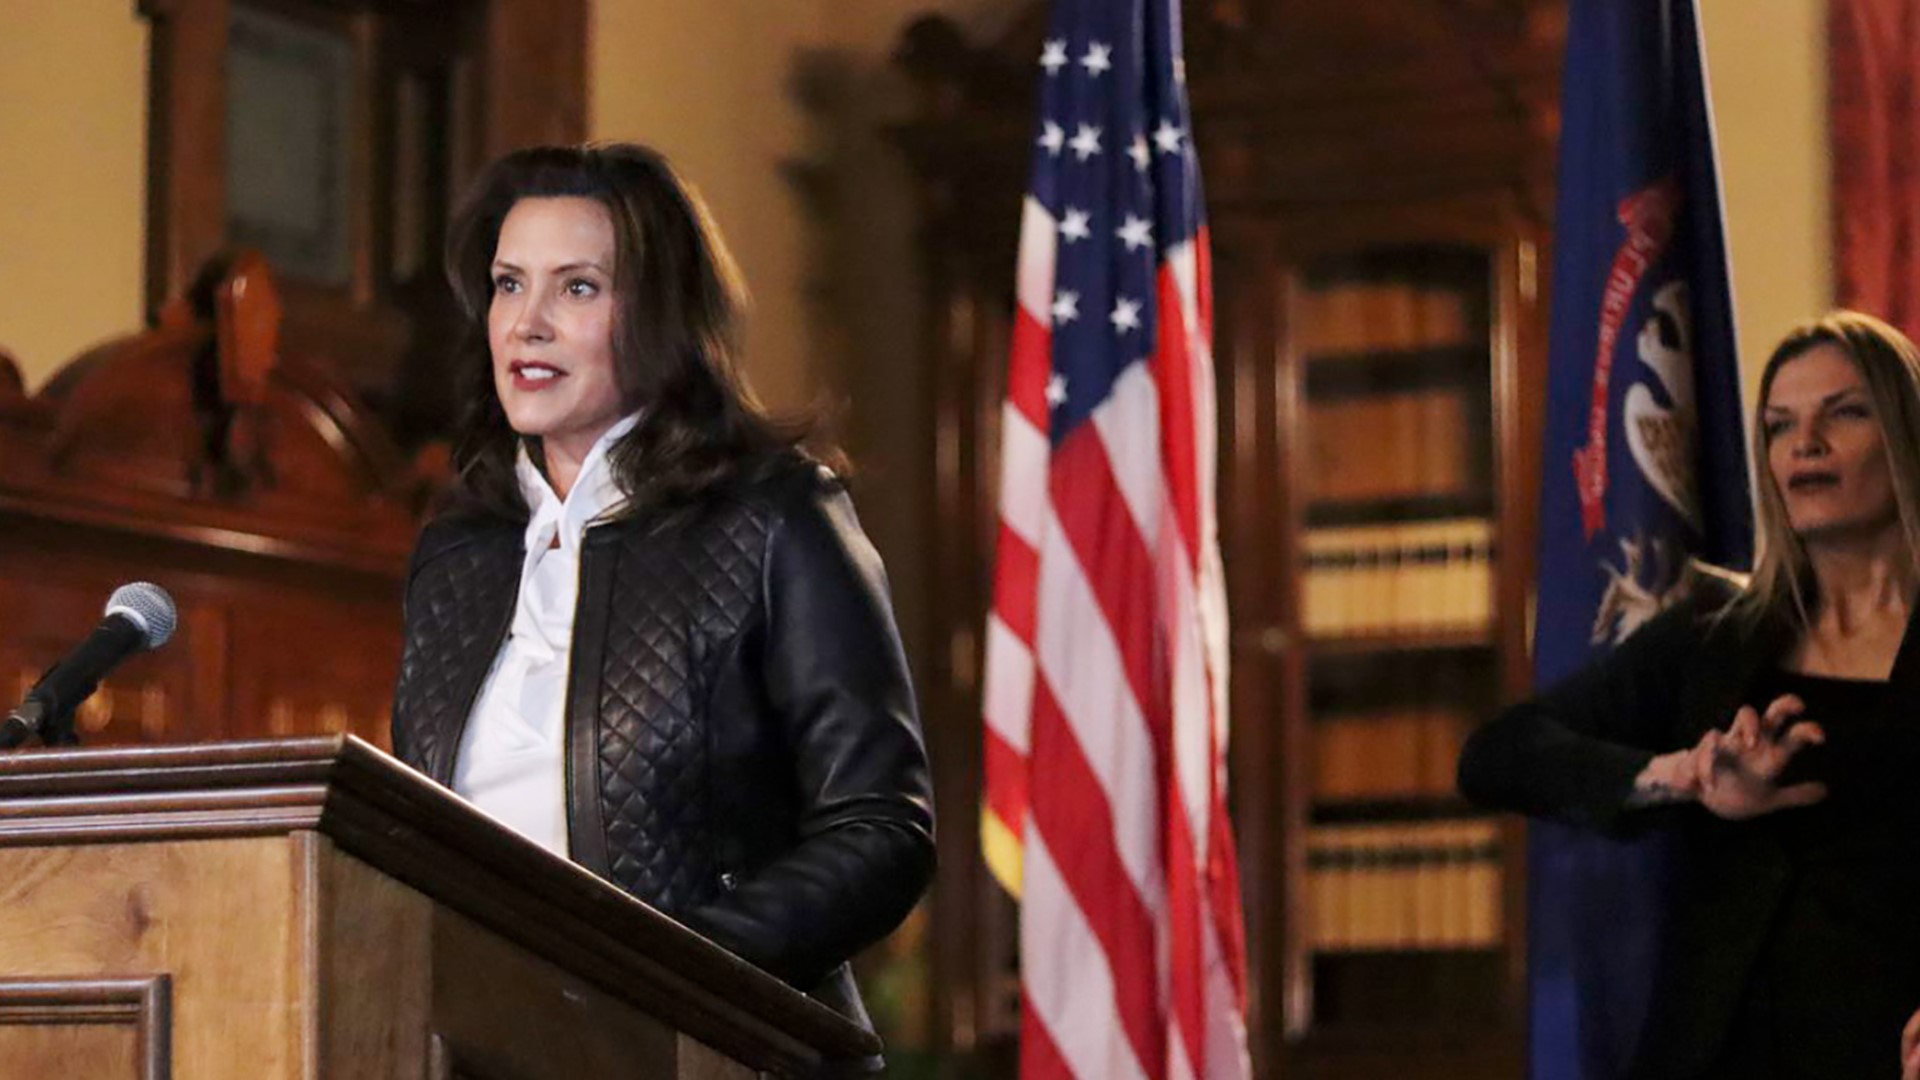 Whitmer said she will continue to focus on the people of Michigan ahead of the November election.